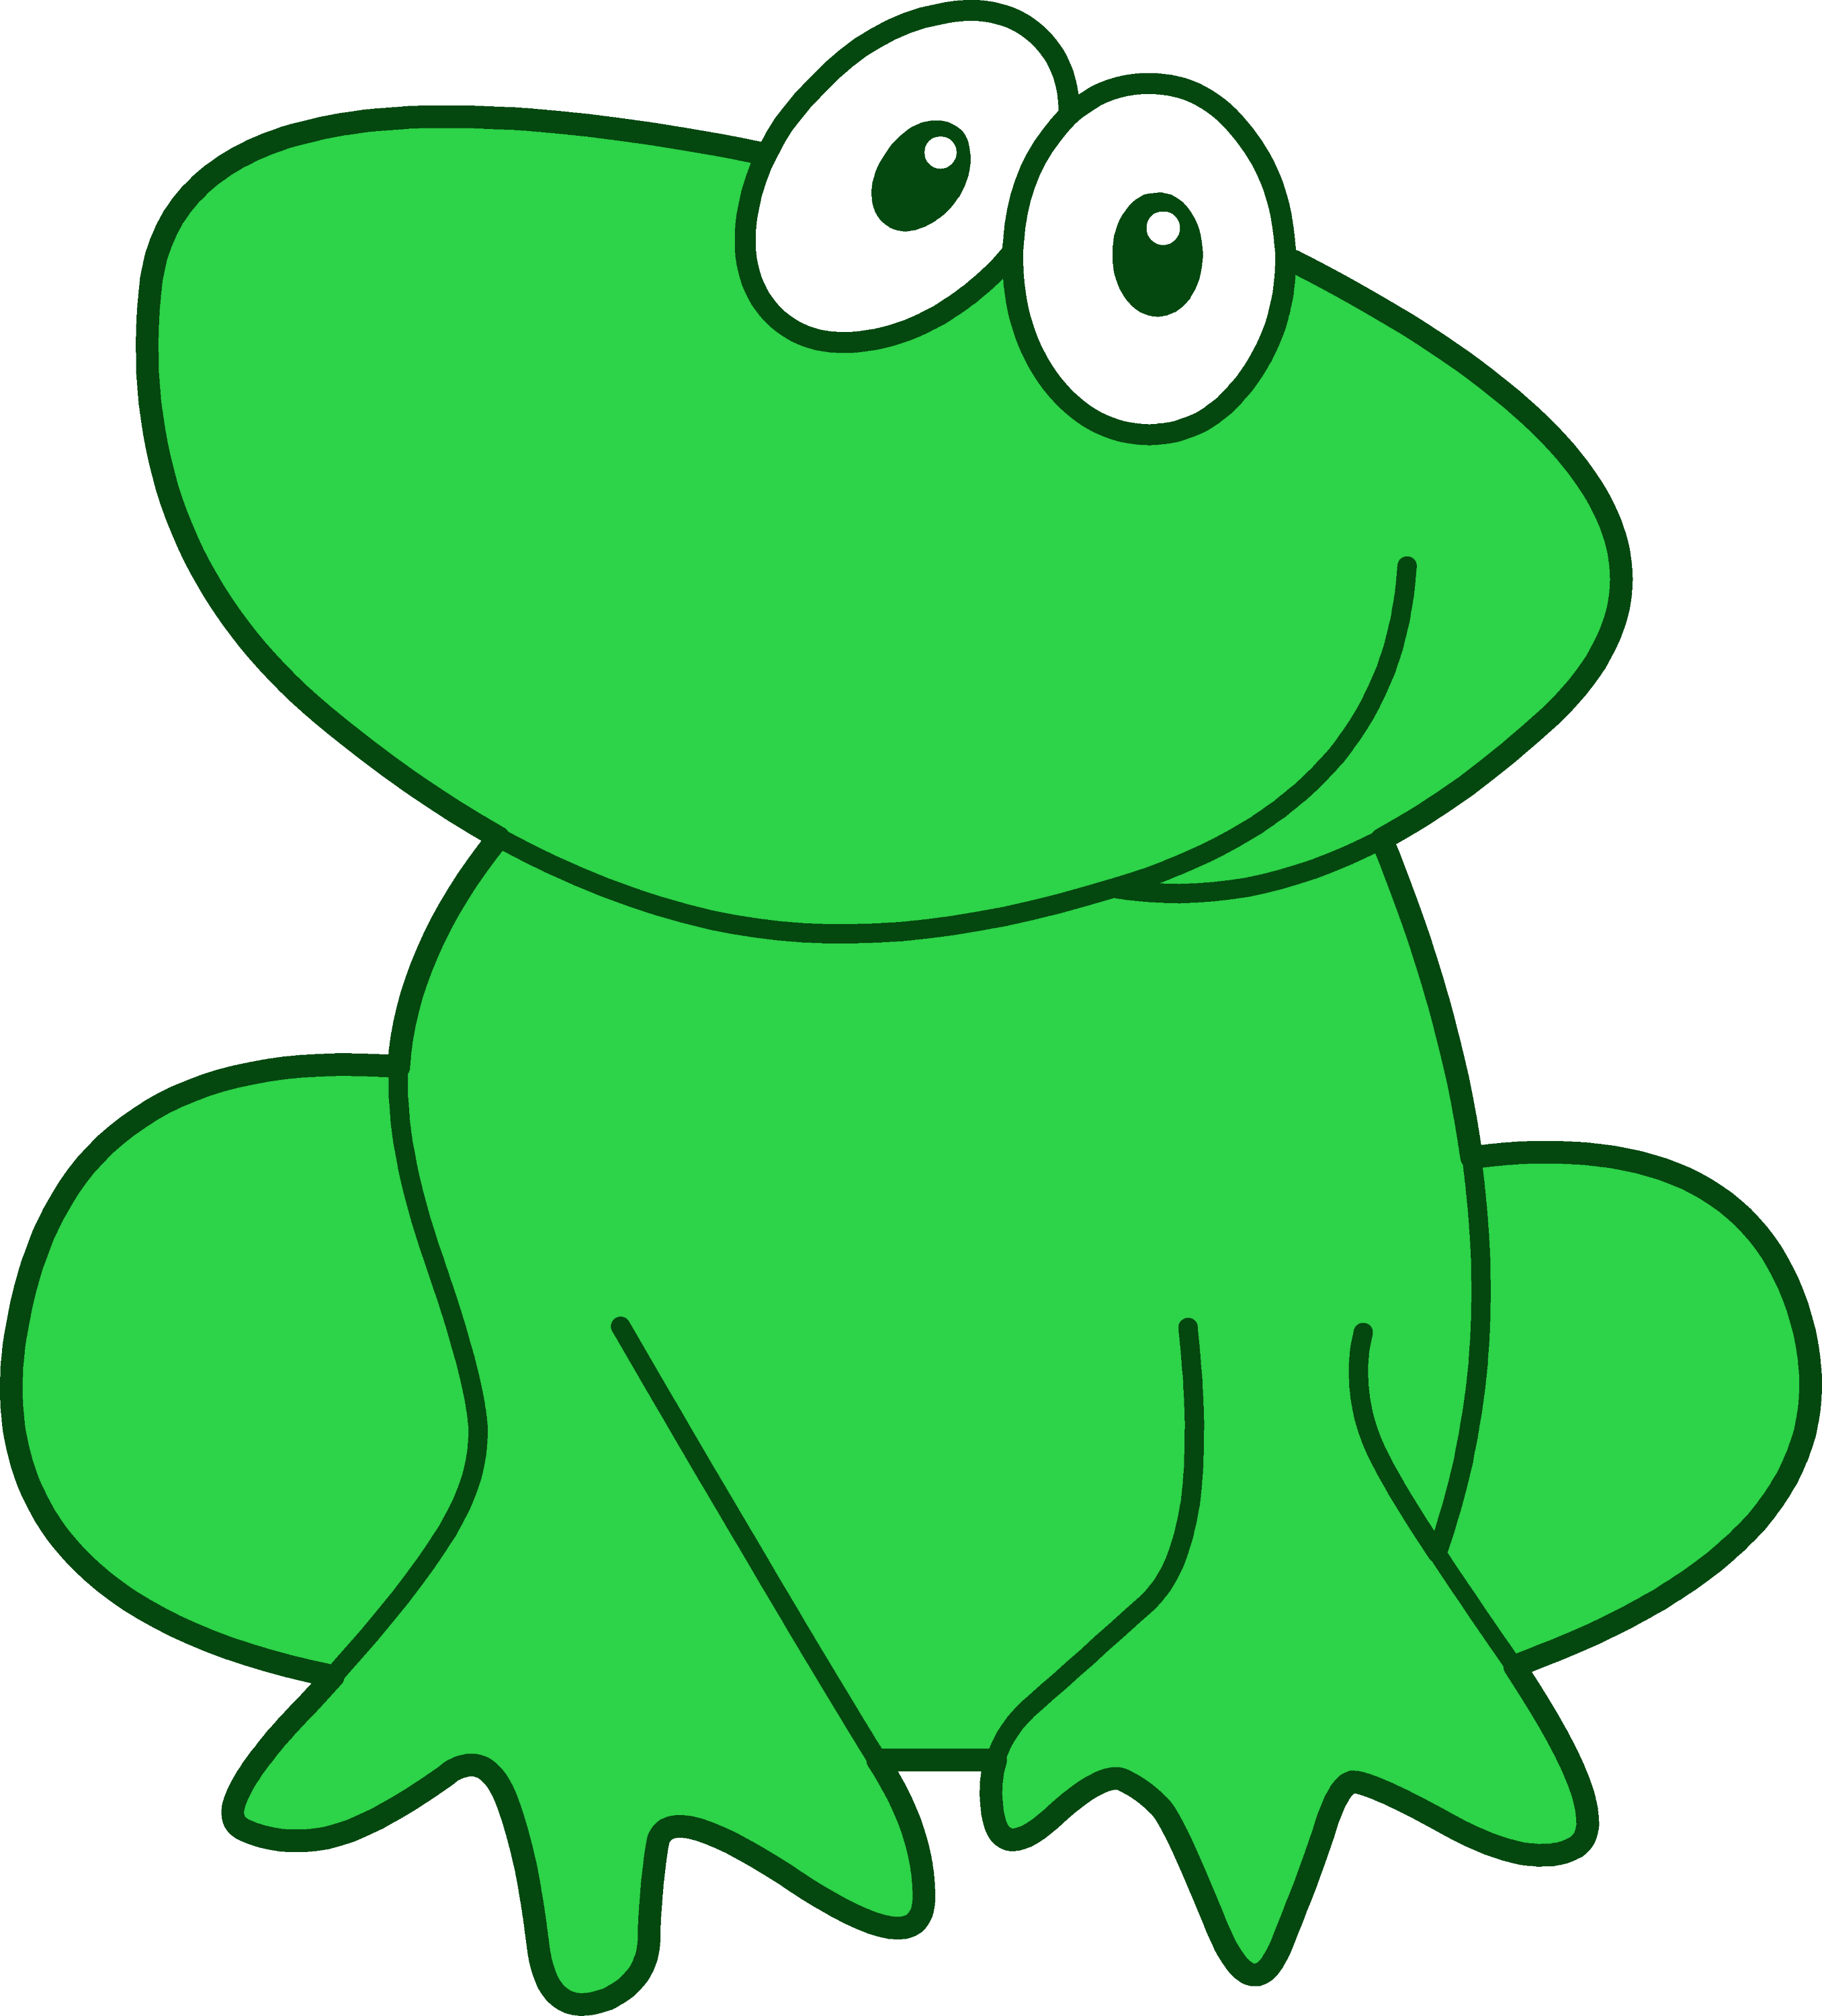 clipart of a frog - photo #46